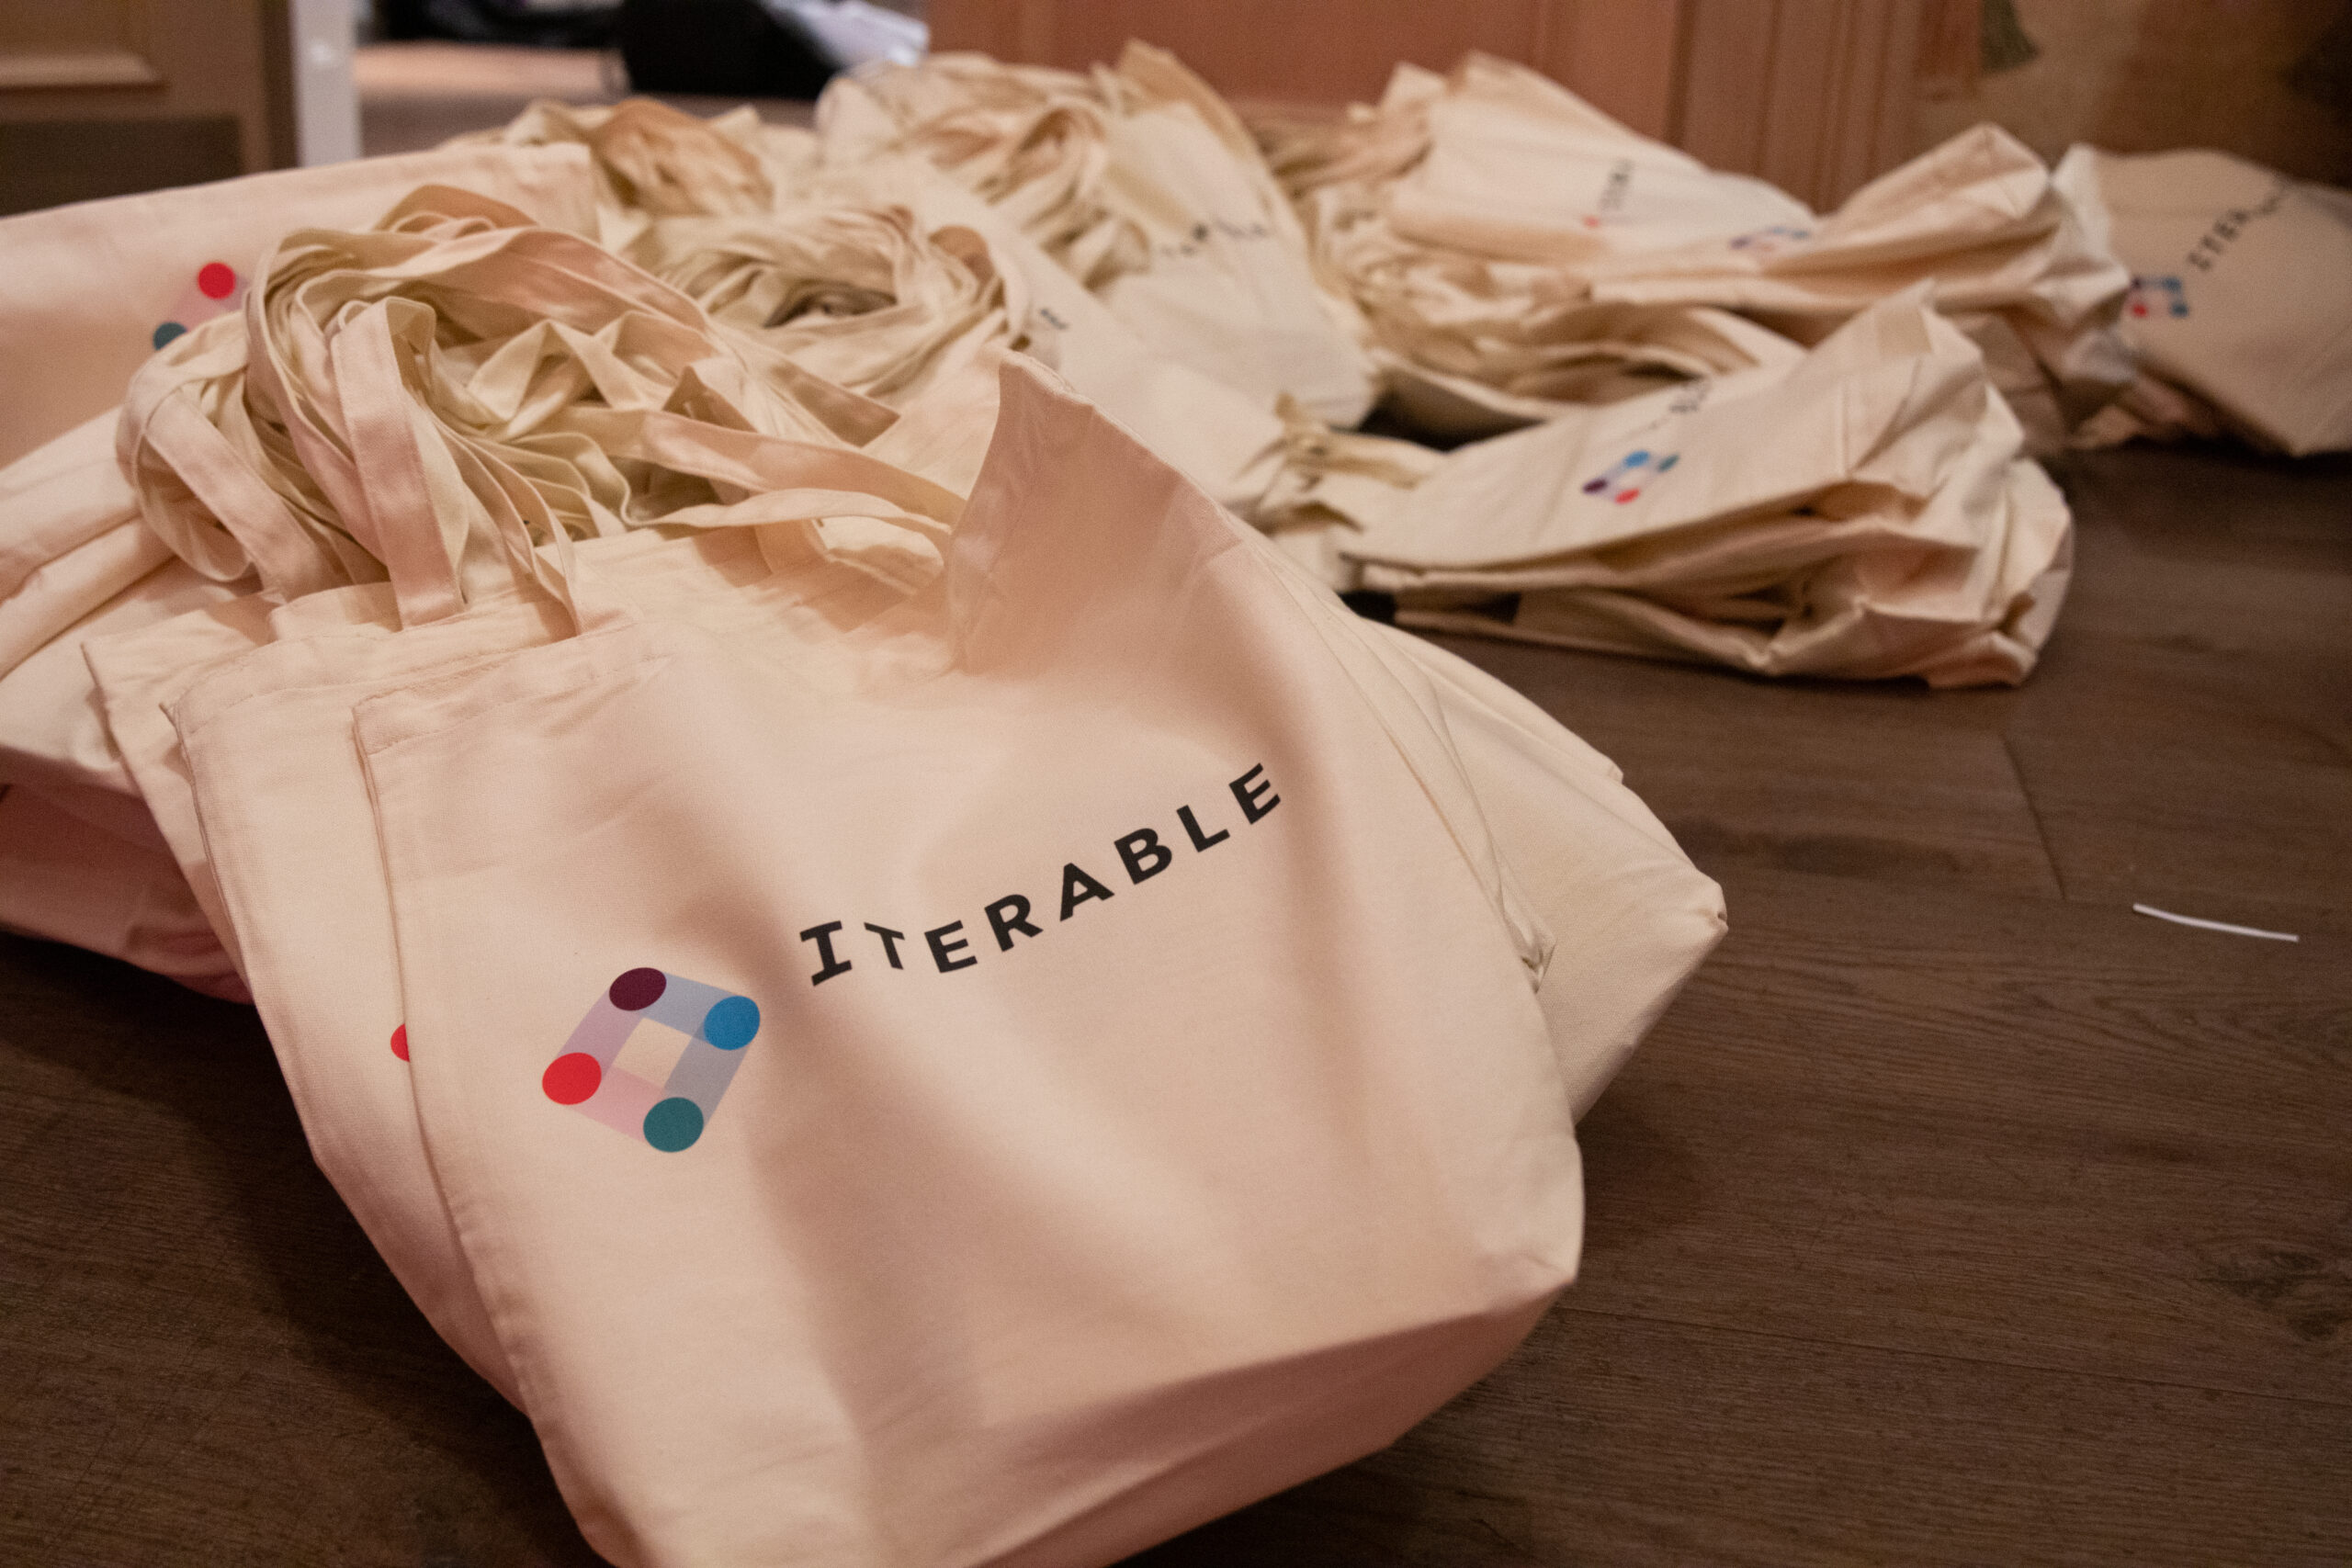 Tote bags with the iterable logo organized on a swag table